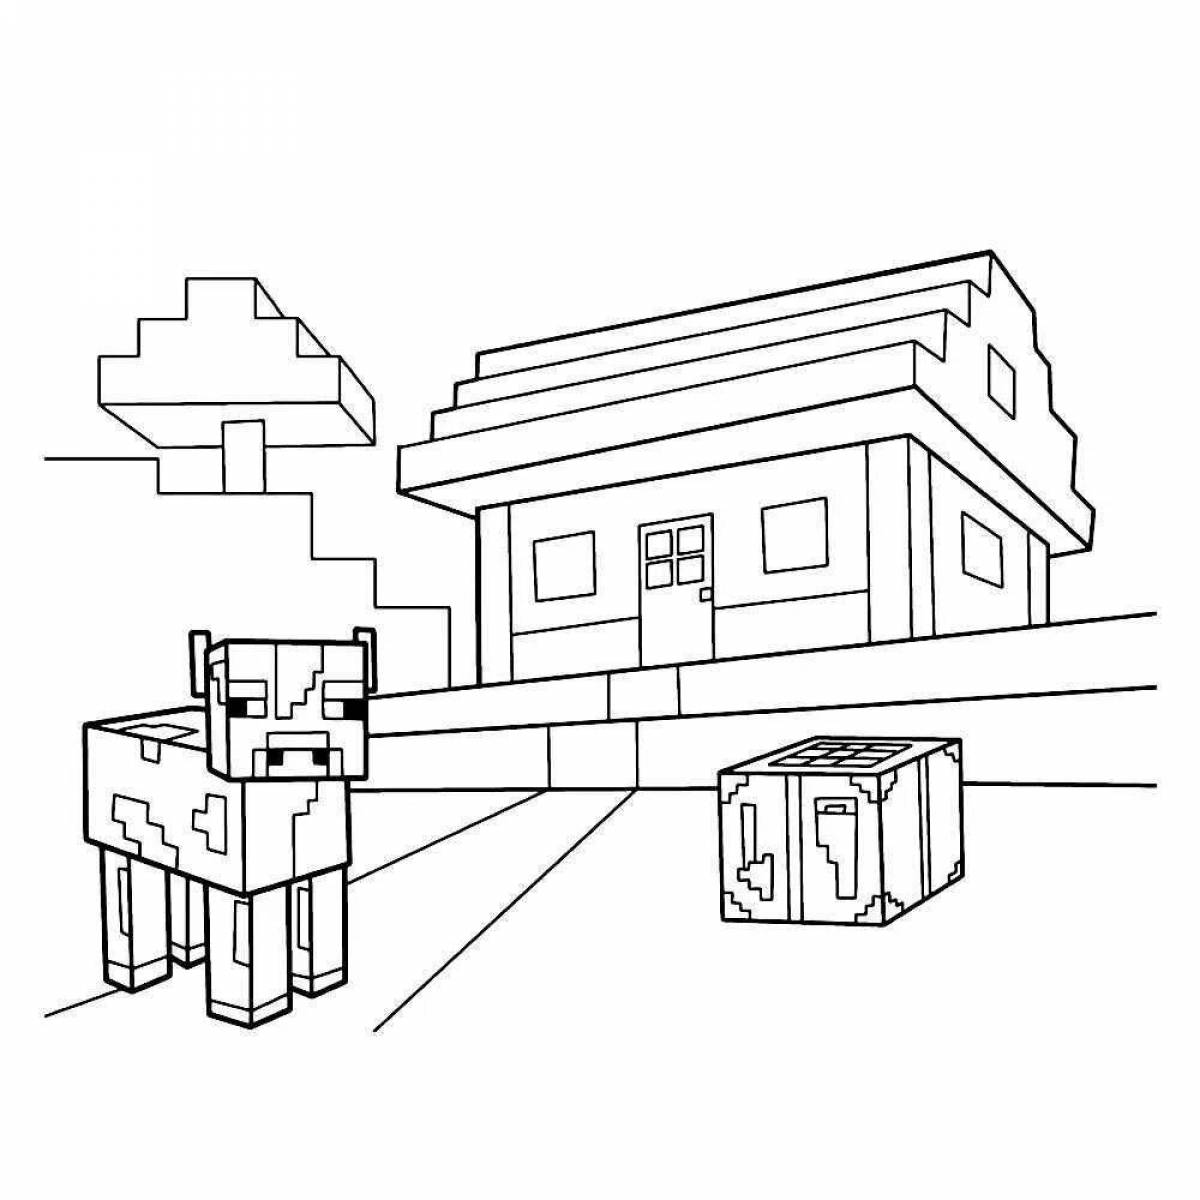 Awesome minecraft ace coloring page